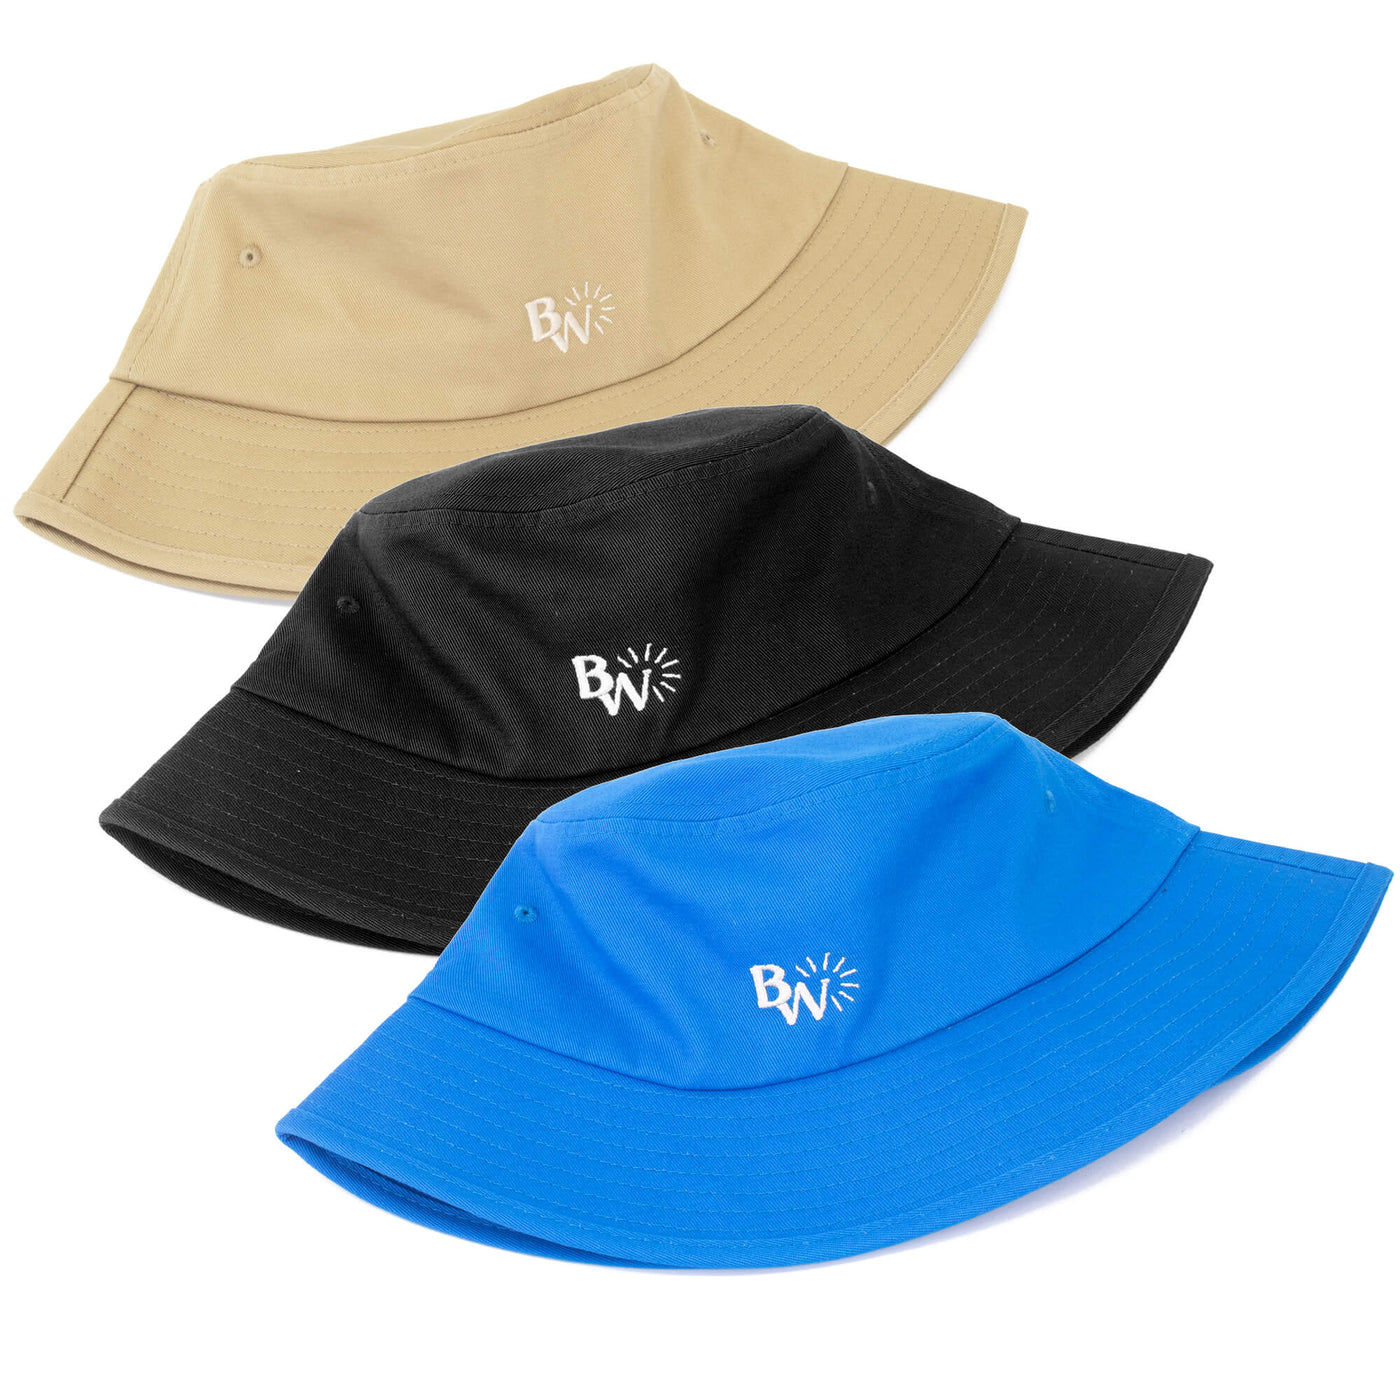 Satin Lined Bucket Hat Collection (Brown, Black and Blue)